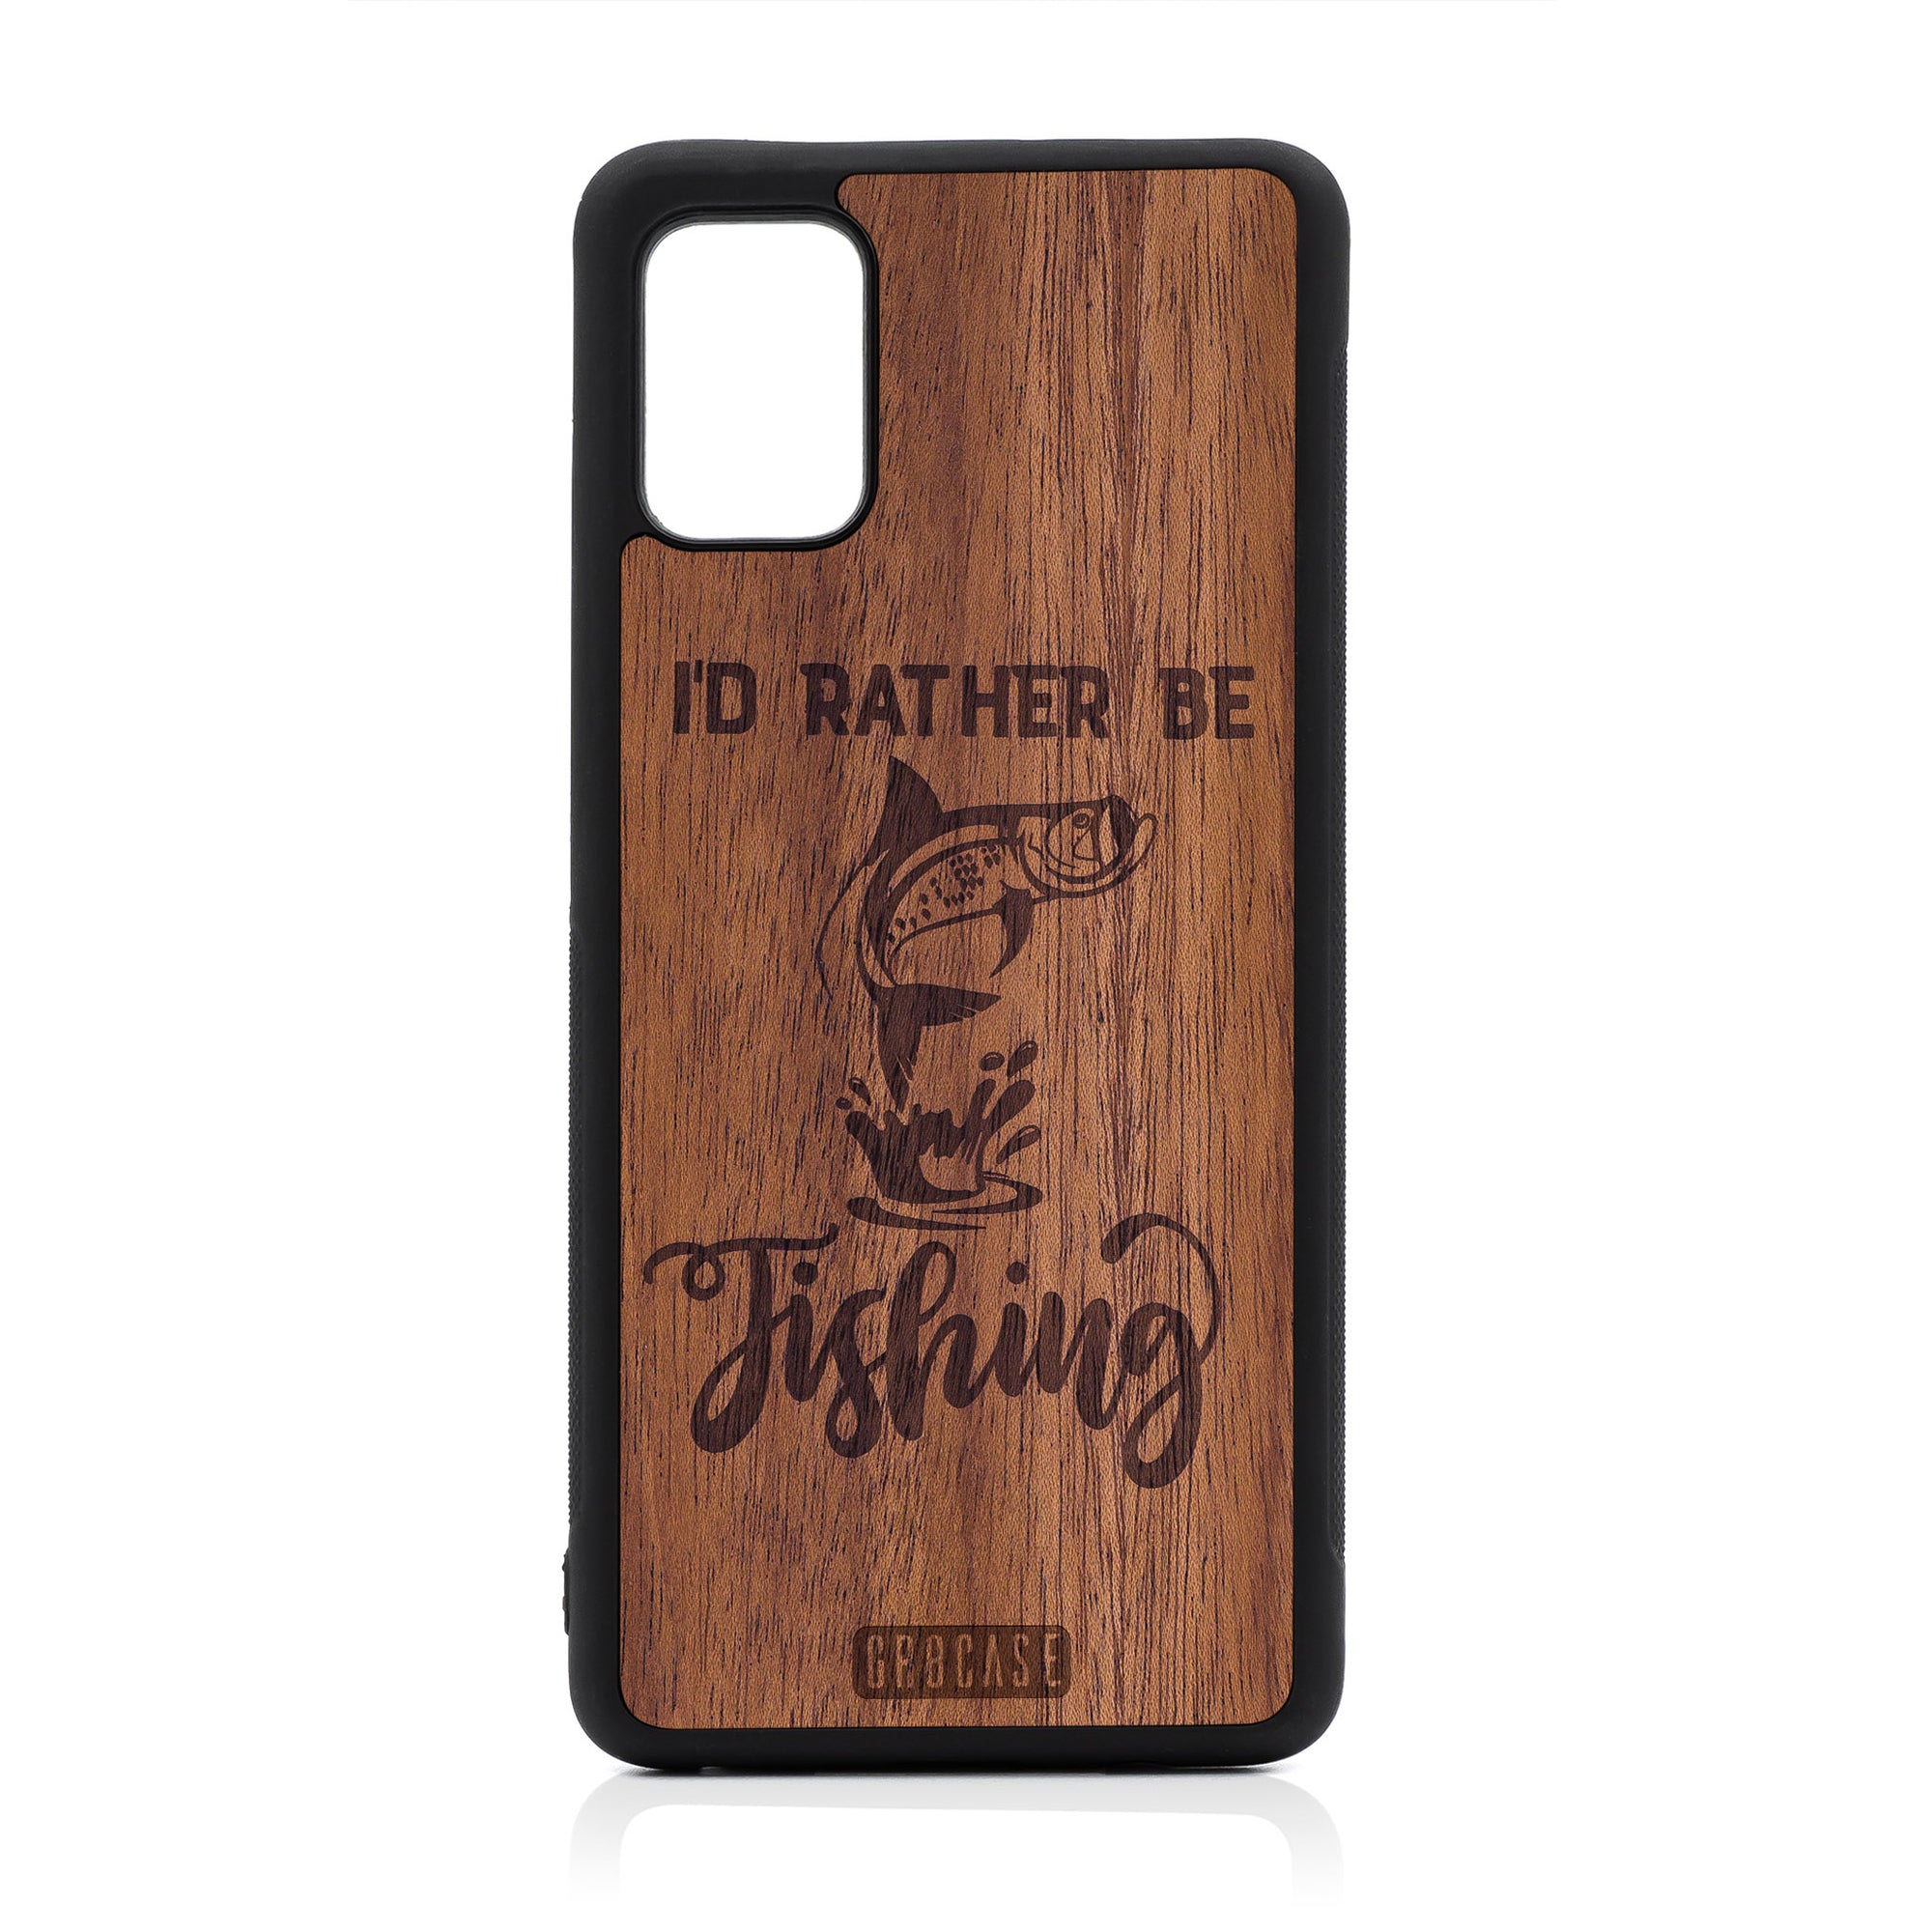 I'd Rather Be Fishing Design Wood Case For Samsung Galaxy A51-5G